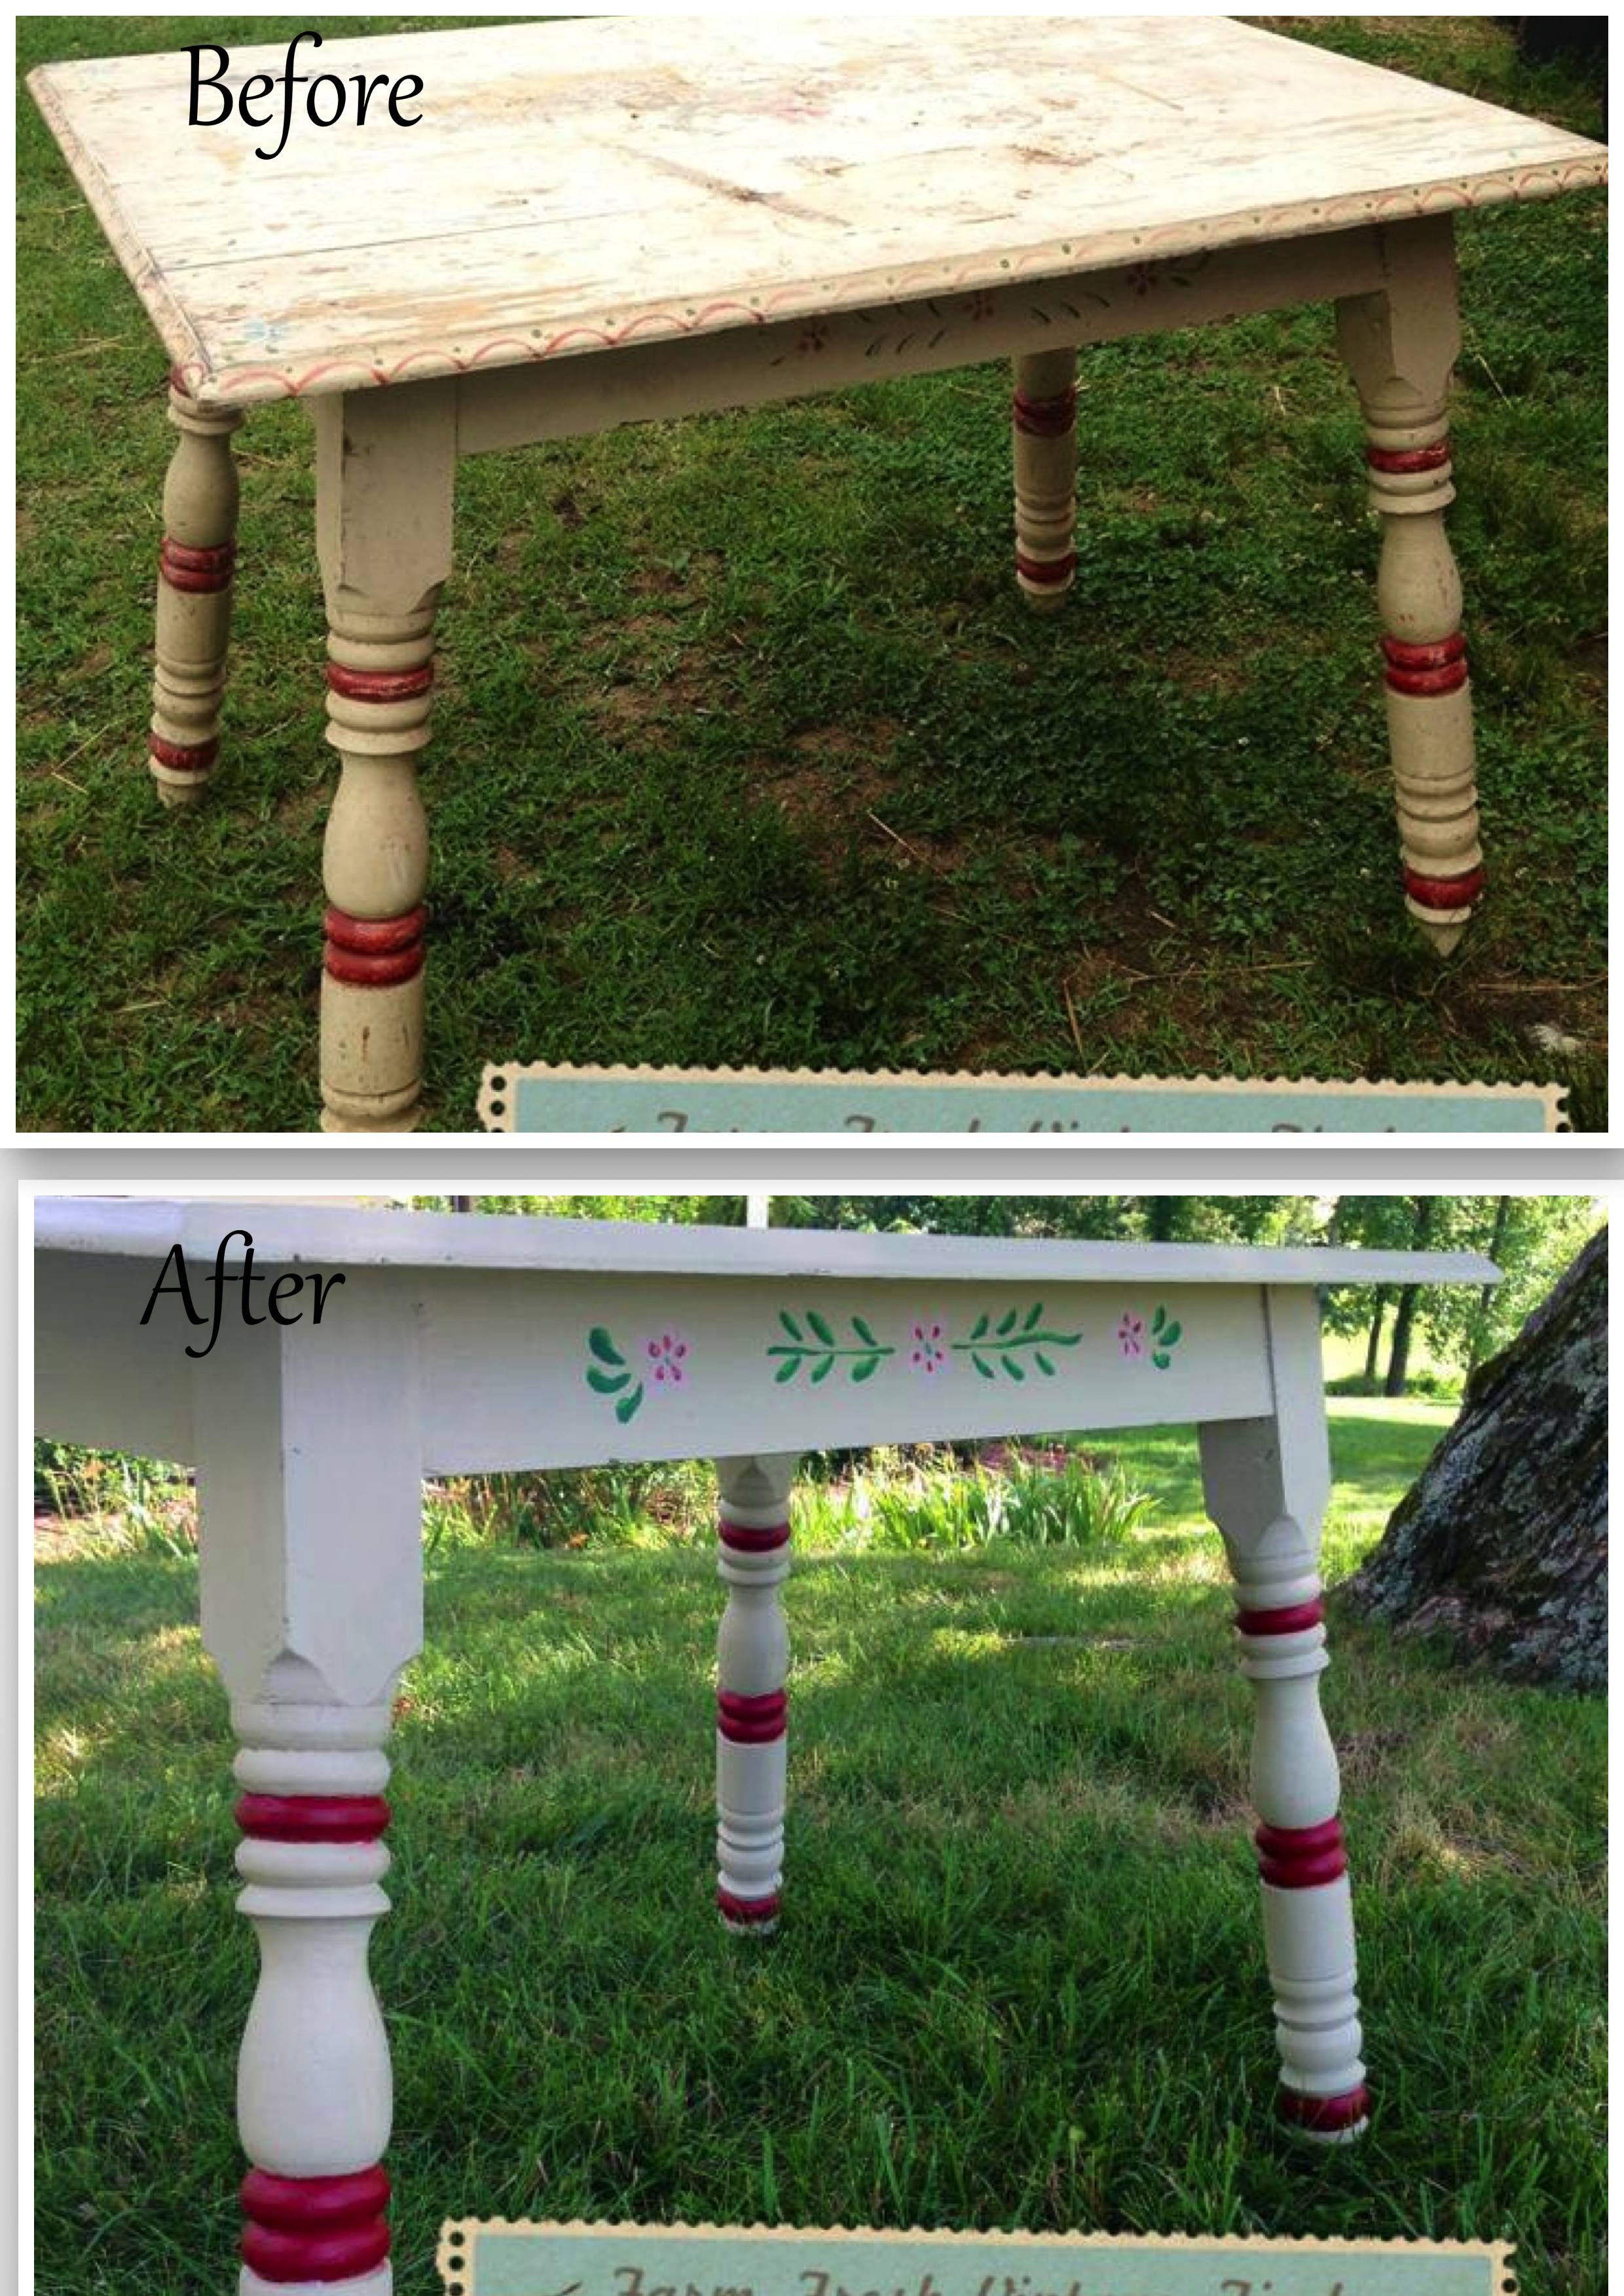 Vintage Table with Hand Painted Details